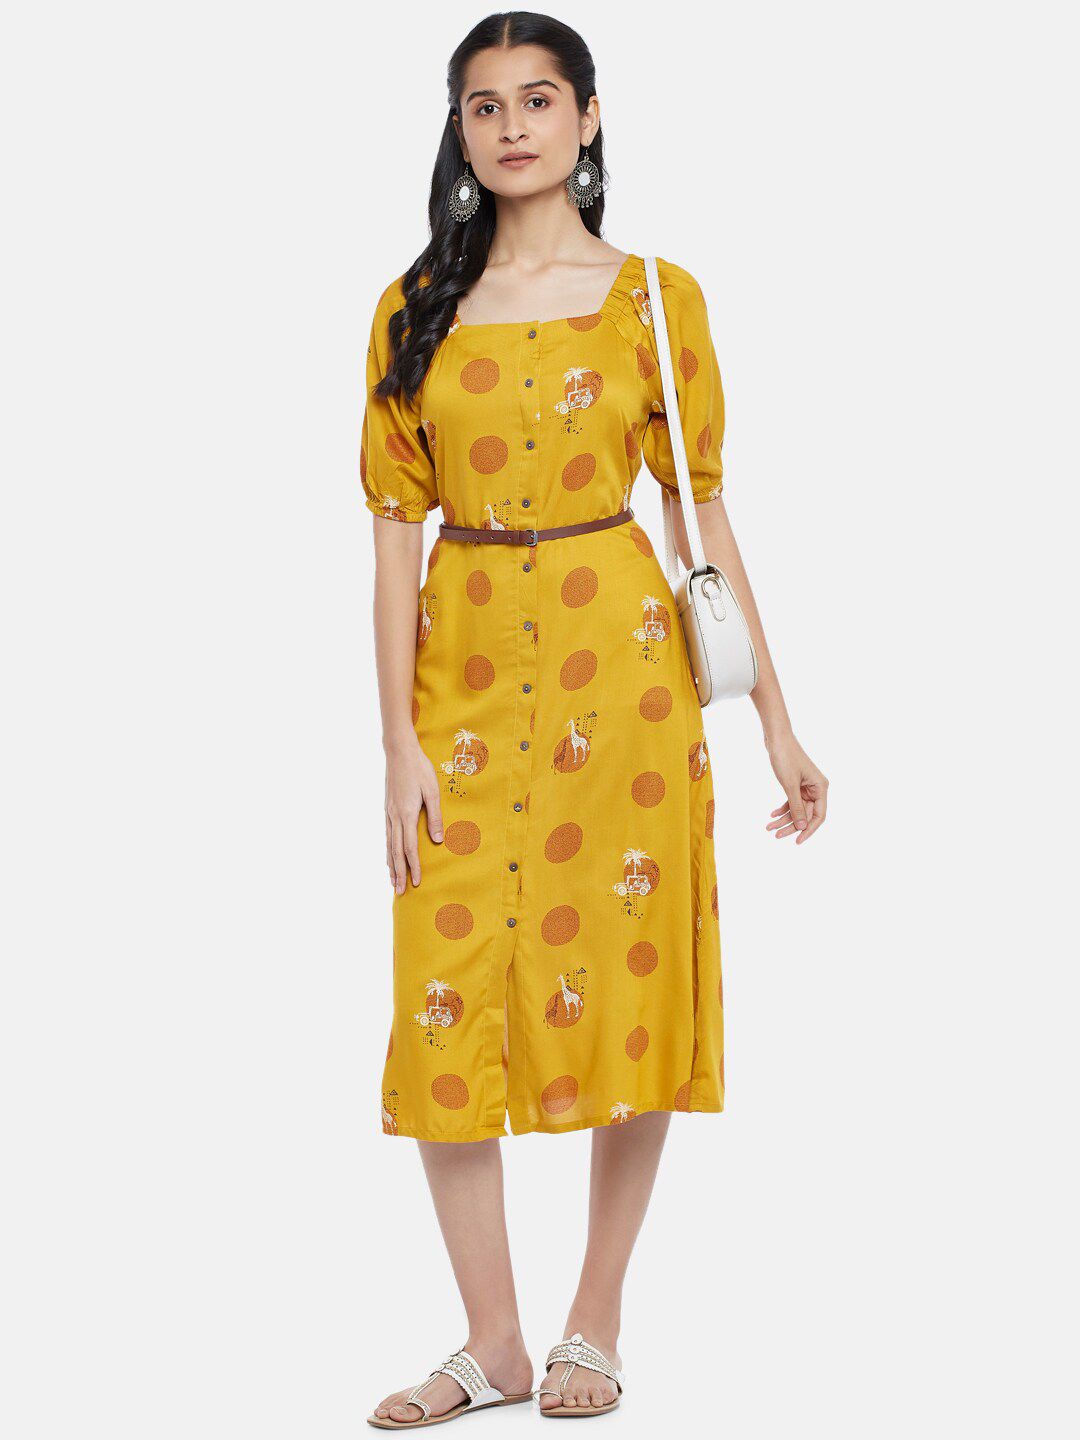 AKKRITI BY PANTALOONS Mustard Yellow & White Belted A-Line Midi Dress Price in India